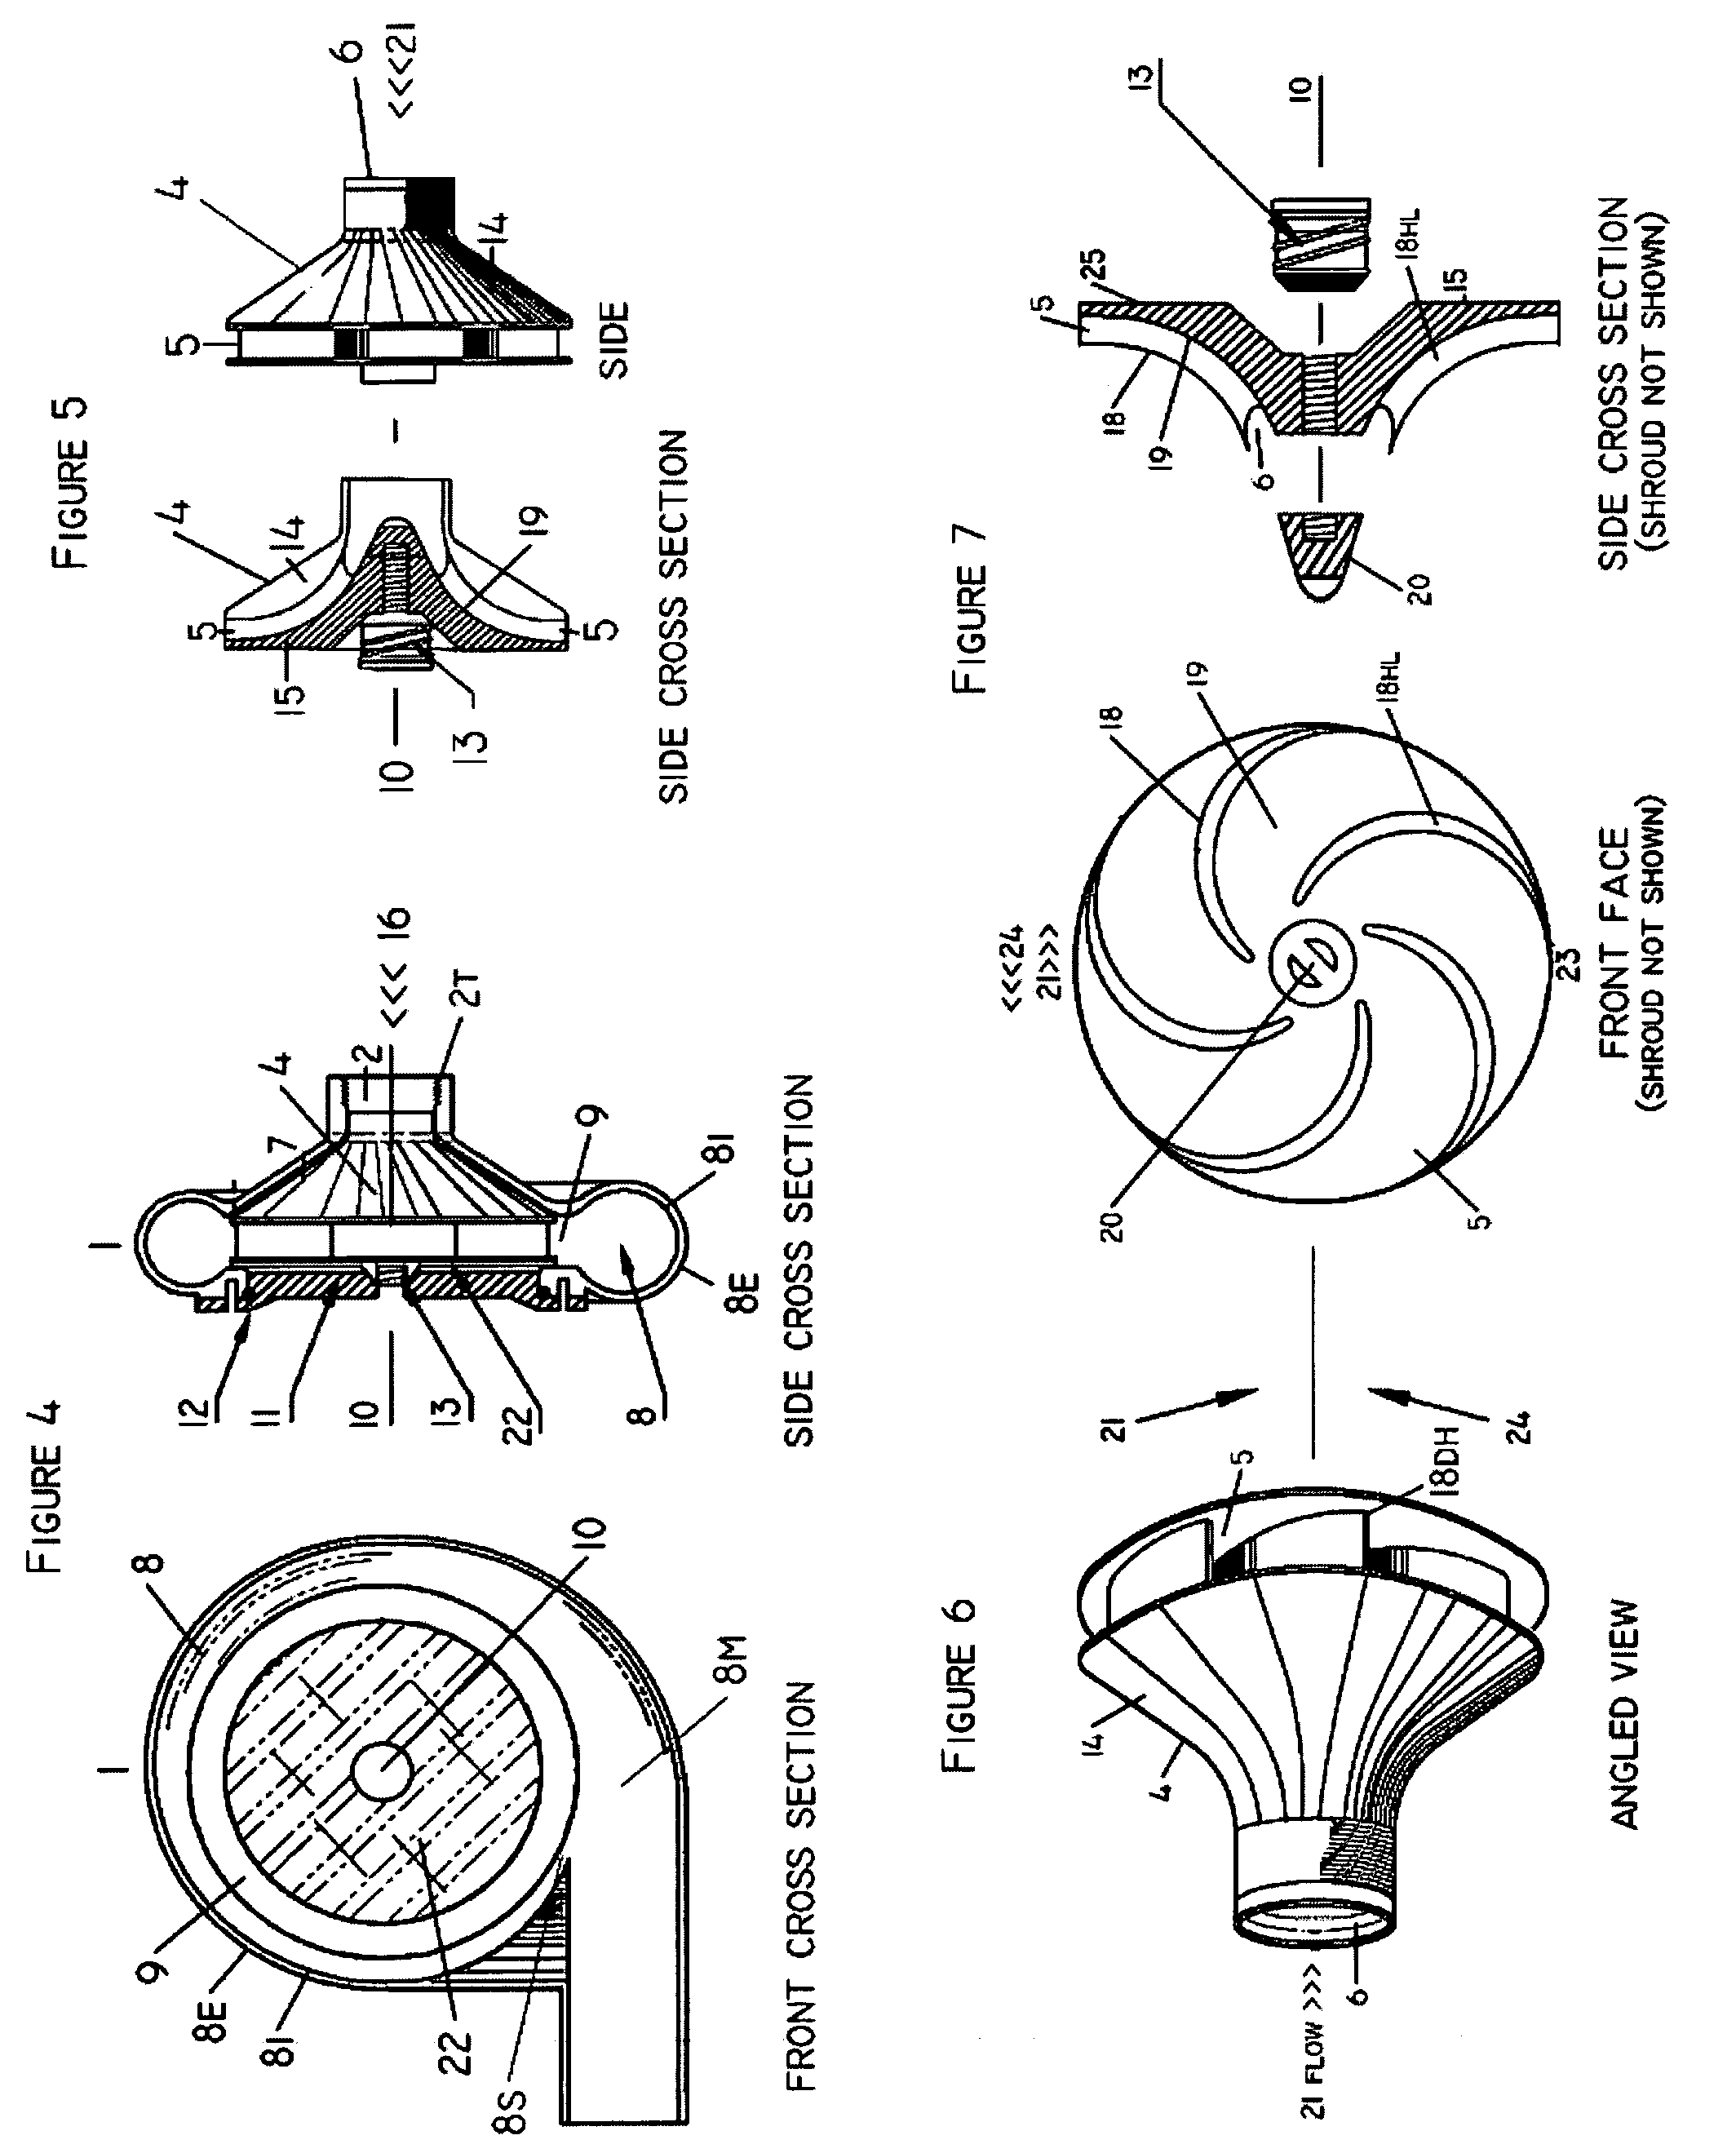 Reduced pressure differential hydroelectric turbine system